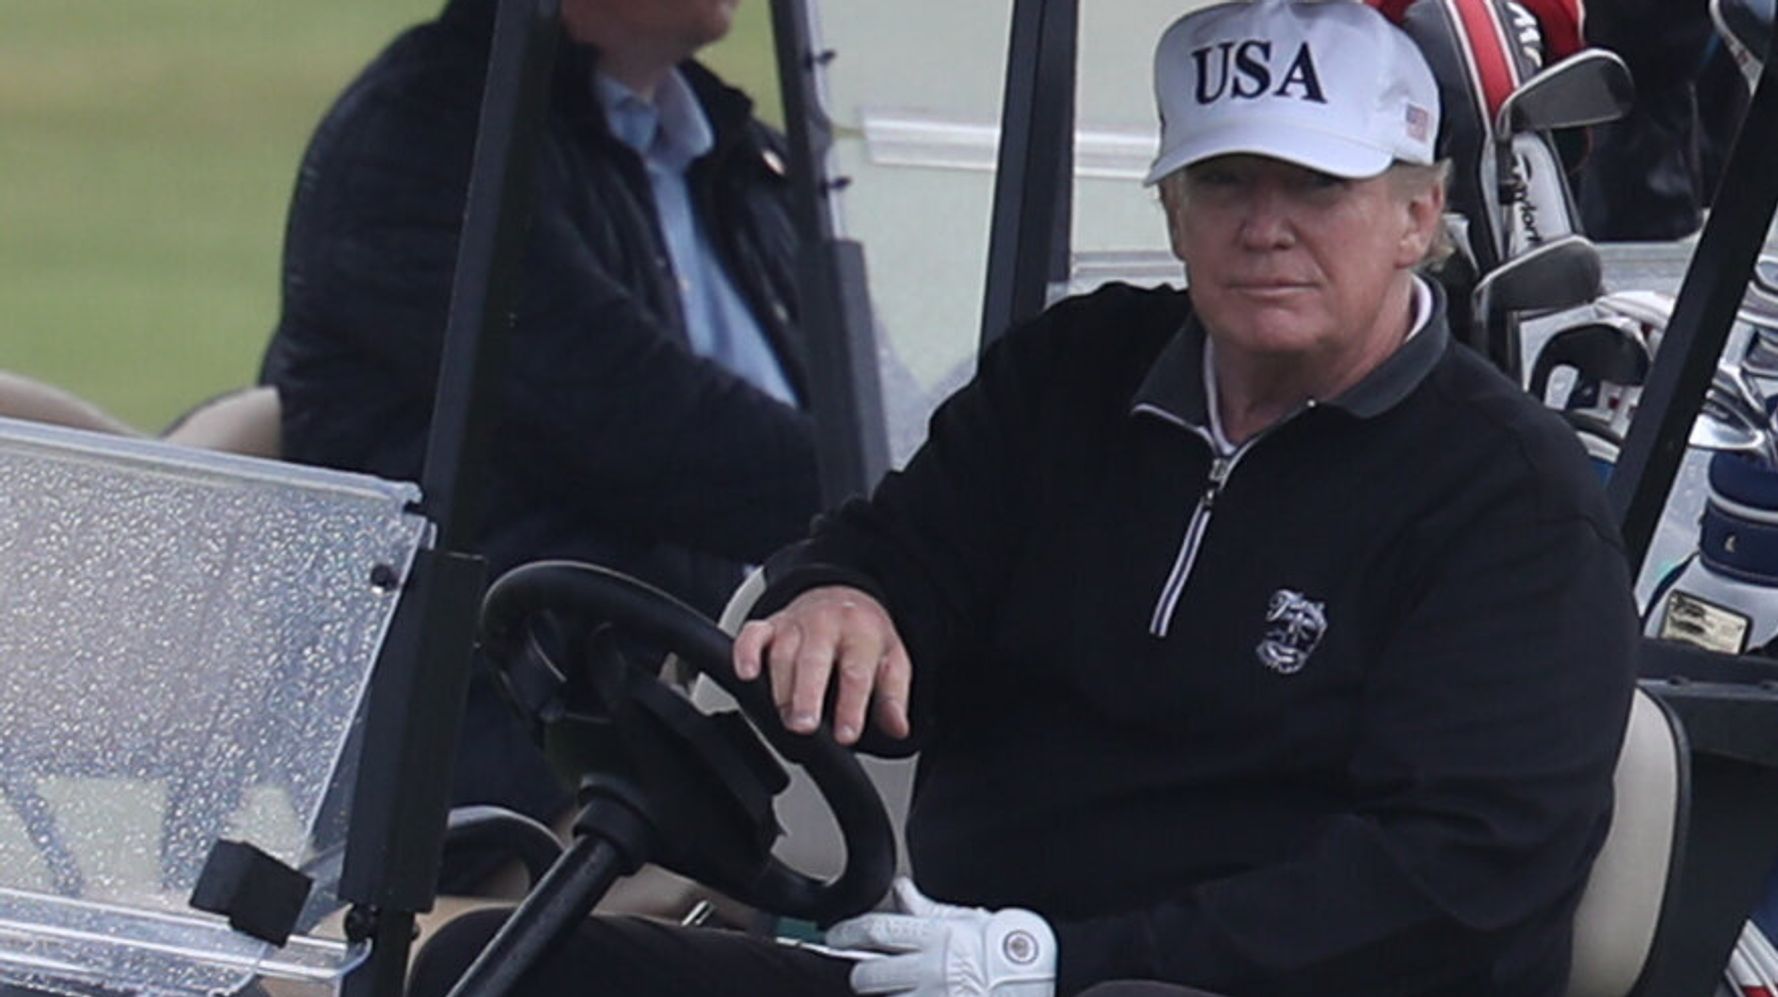 Trump's Scottish Golf Resorts Took $800,000 In Taxpayer Funds To Save Jobs, But Cut Workers